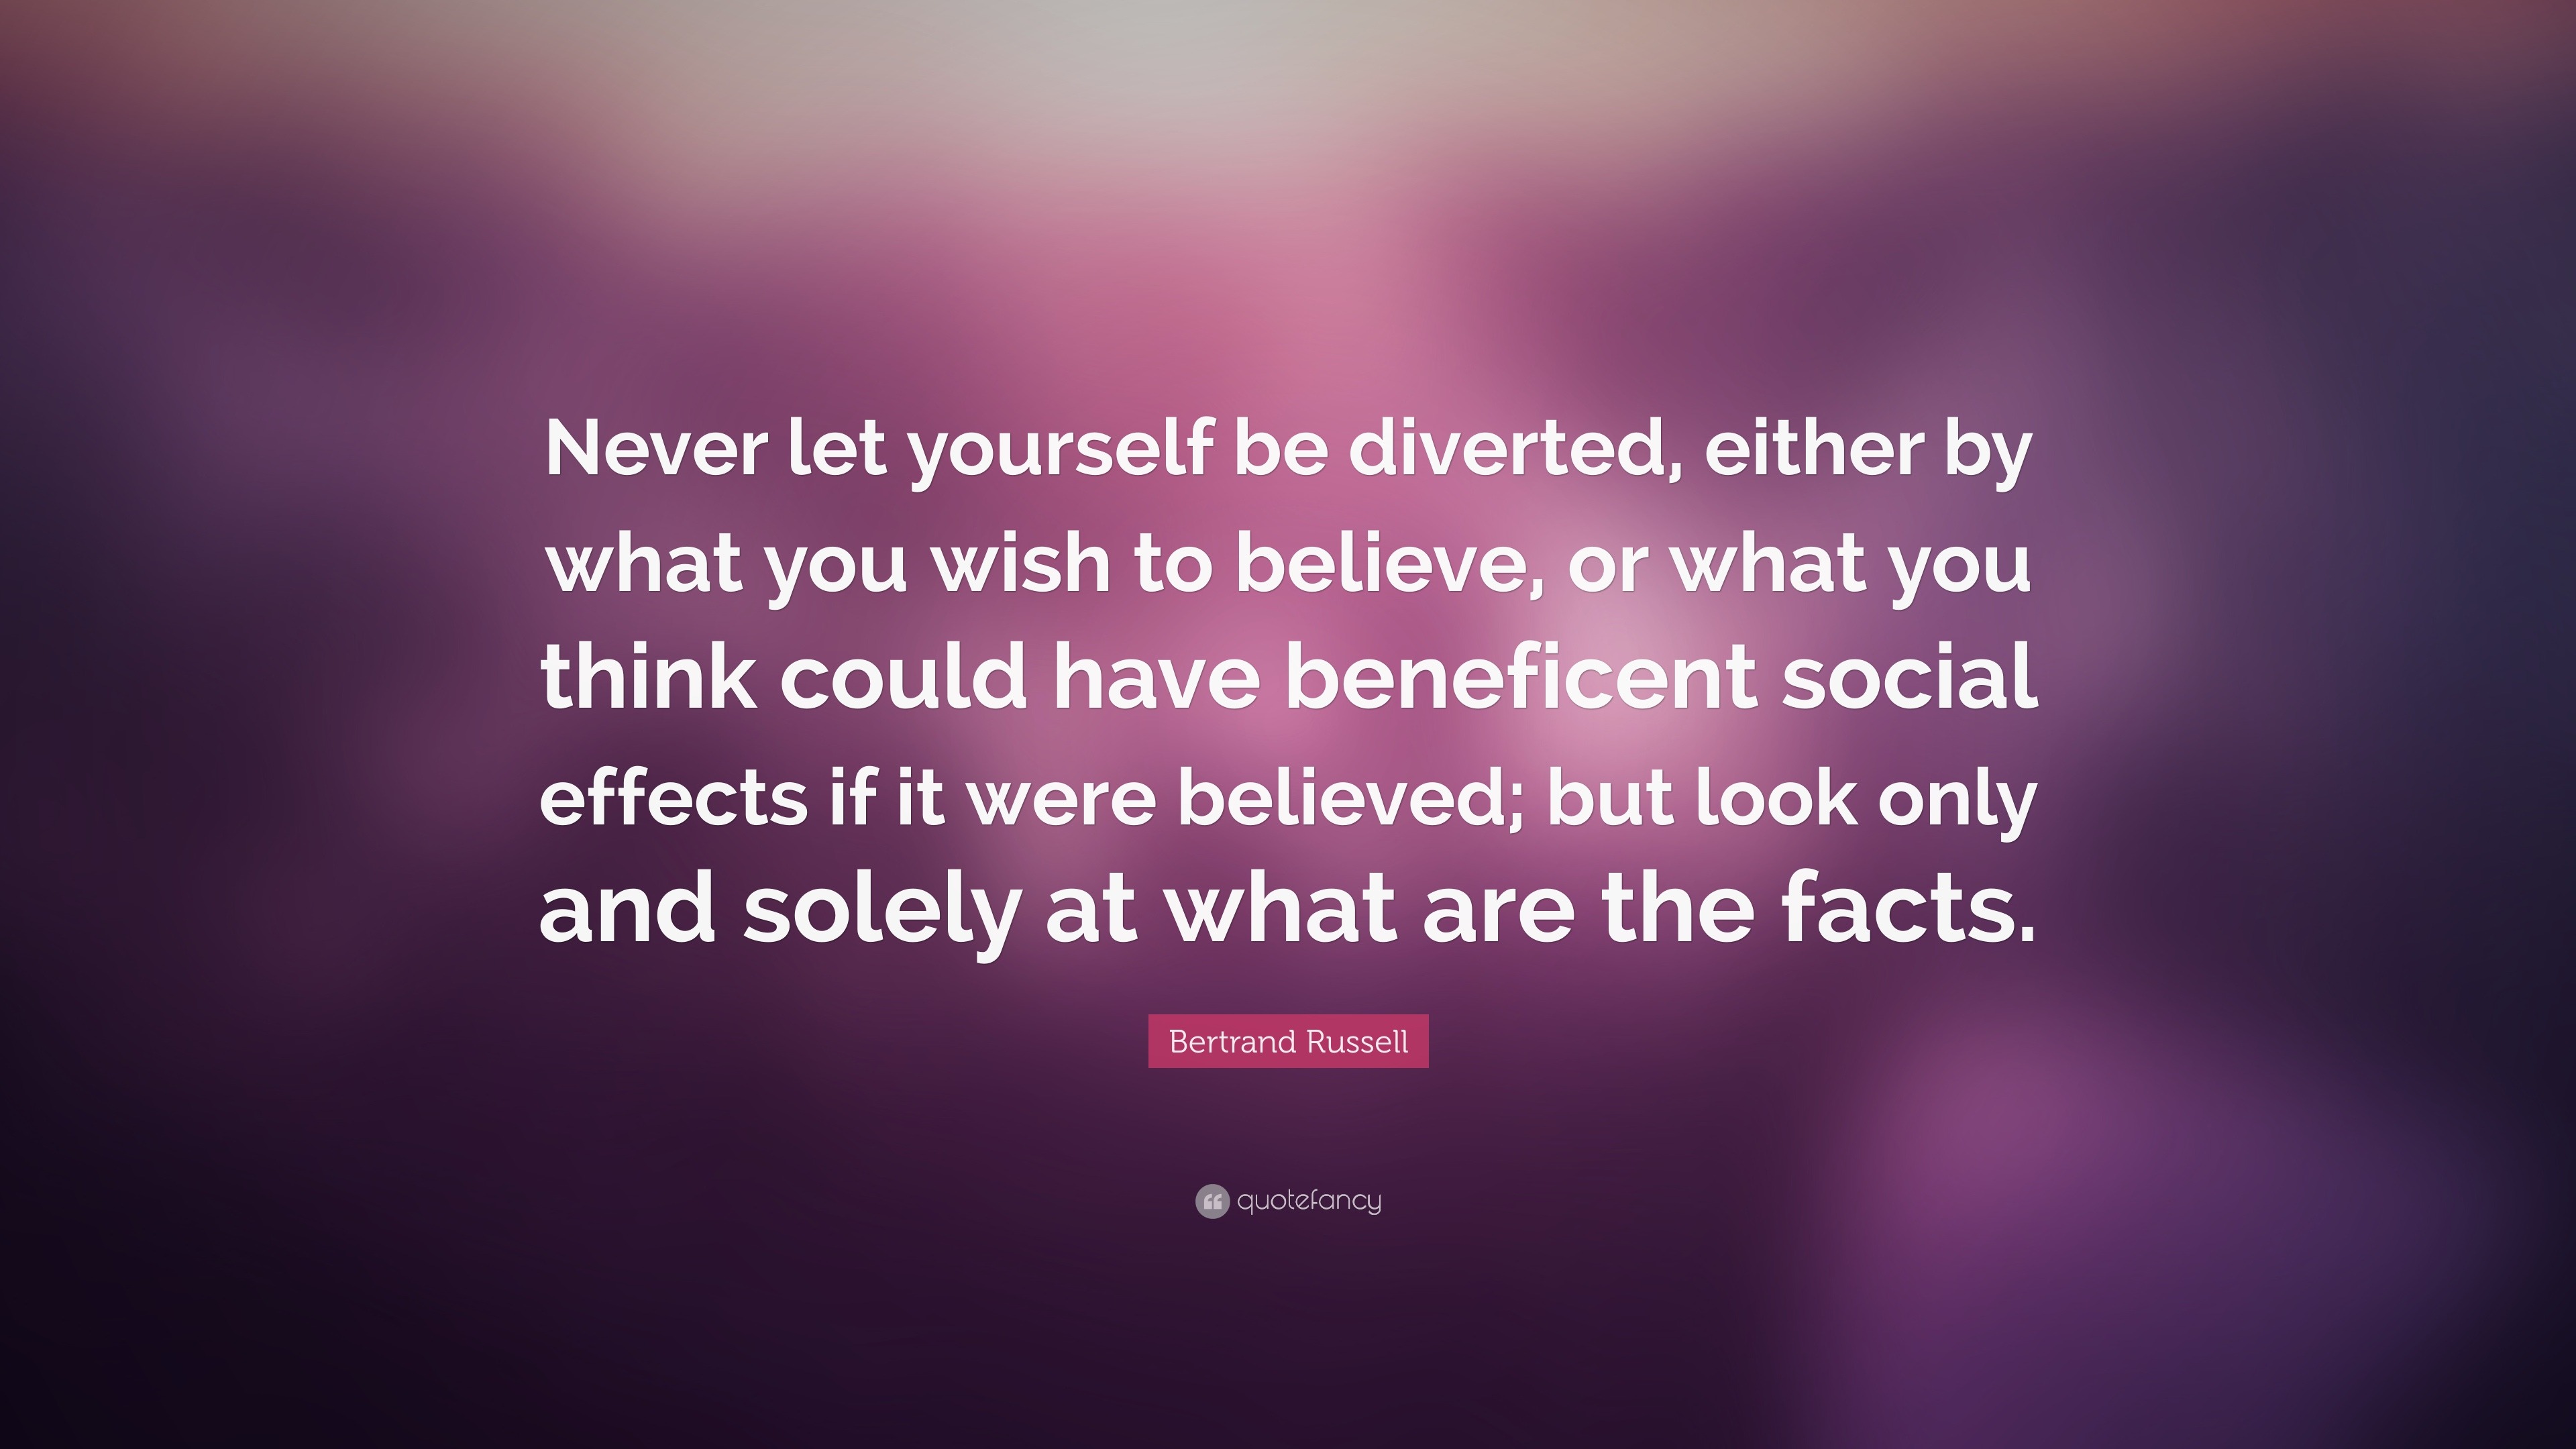 Bertrand Russell Quote: “Never let yourself be diverted, either by what ...